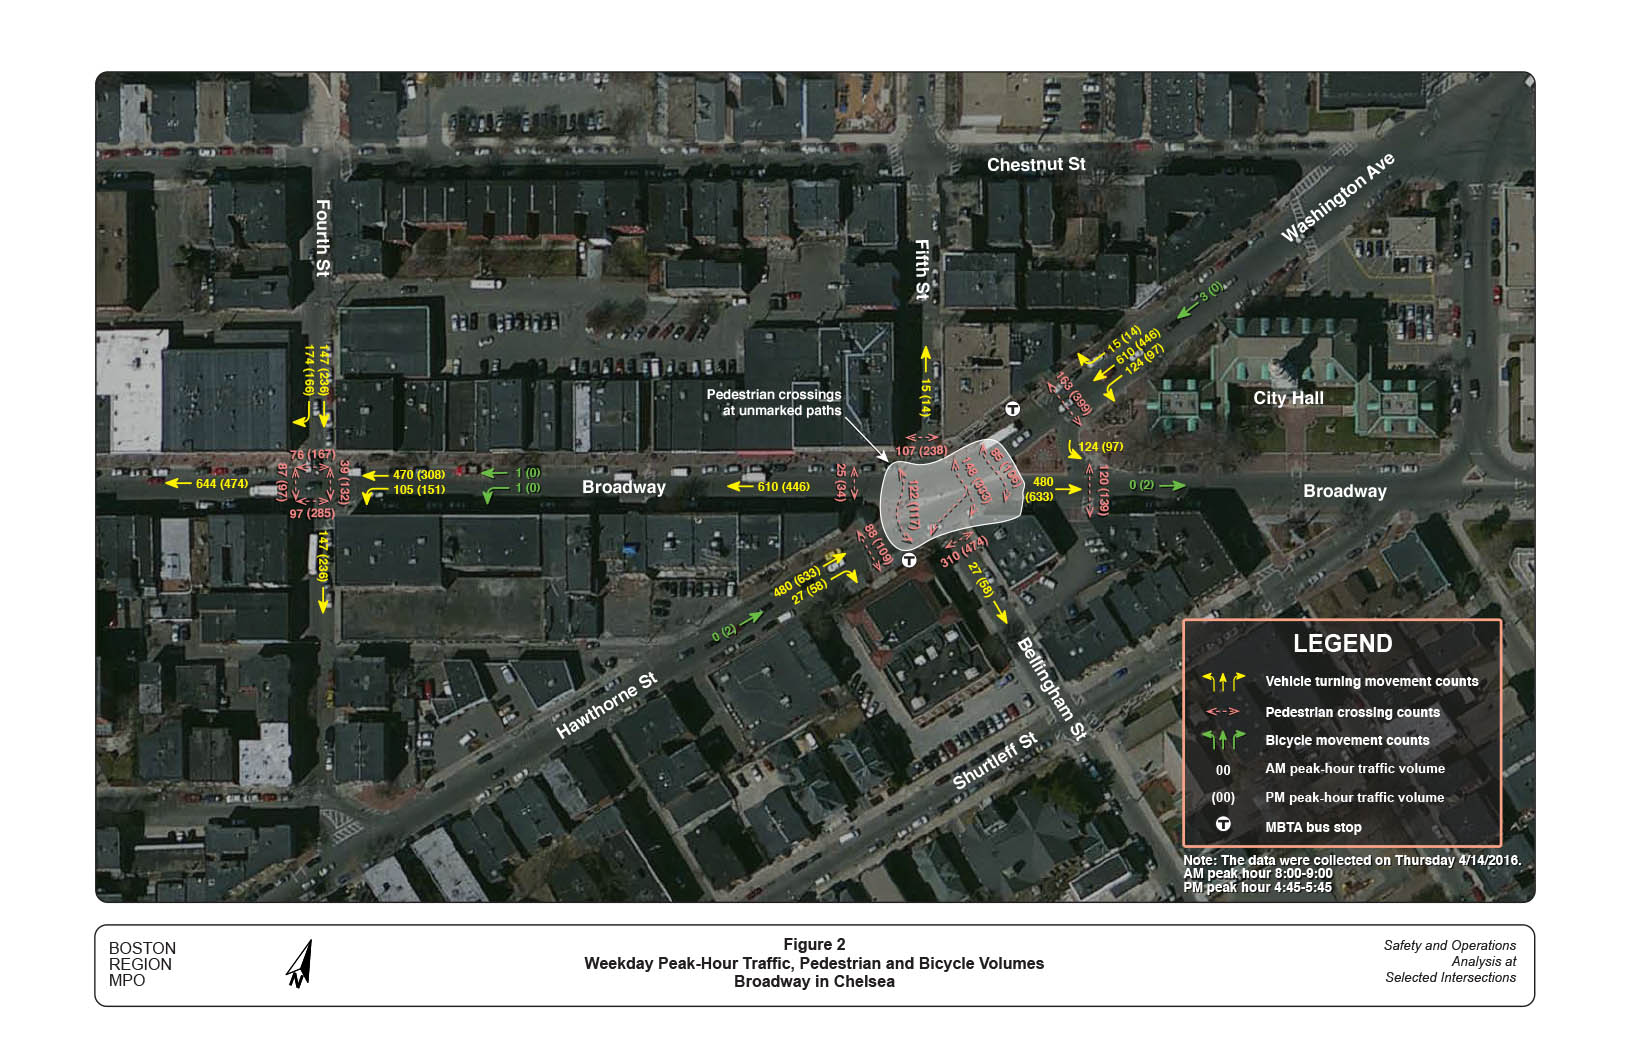 Figure 2 — Weekday Peak-Hour Traffic, Pedestrian and Bicycle Volumes
Aerial view of study area with computer-drawn superimposed notations that show: vehicle turning-movement counts, bicycle movement counts, MBTA bus stop, and AM and PM peak-hour traffic volume.
